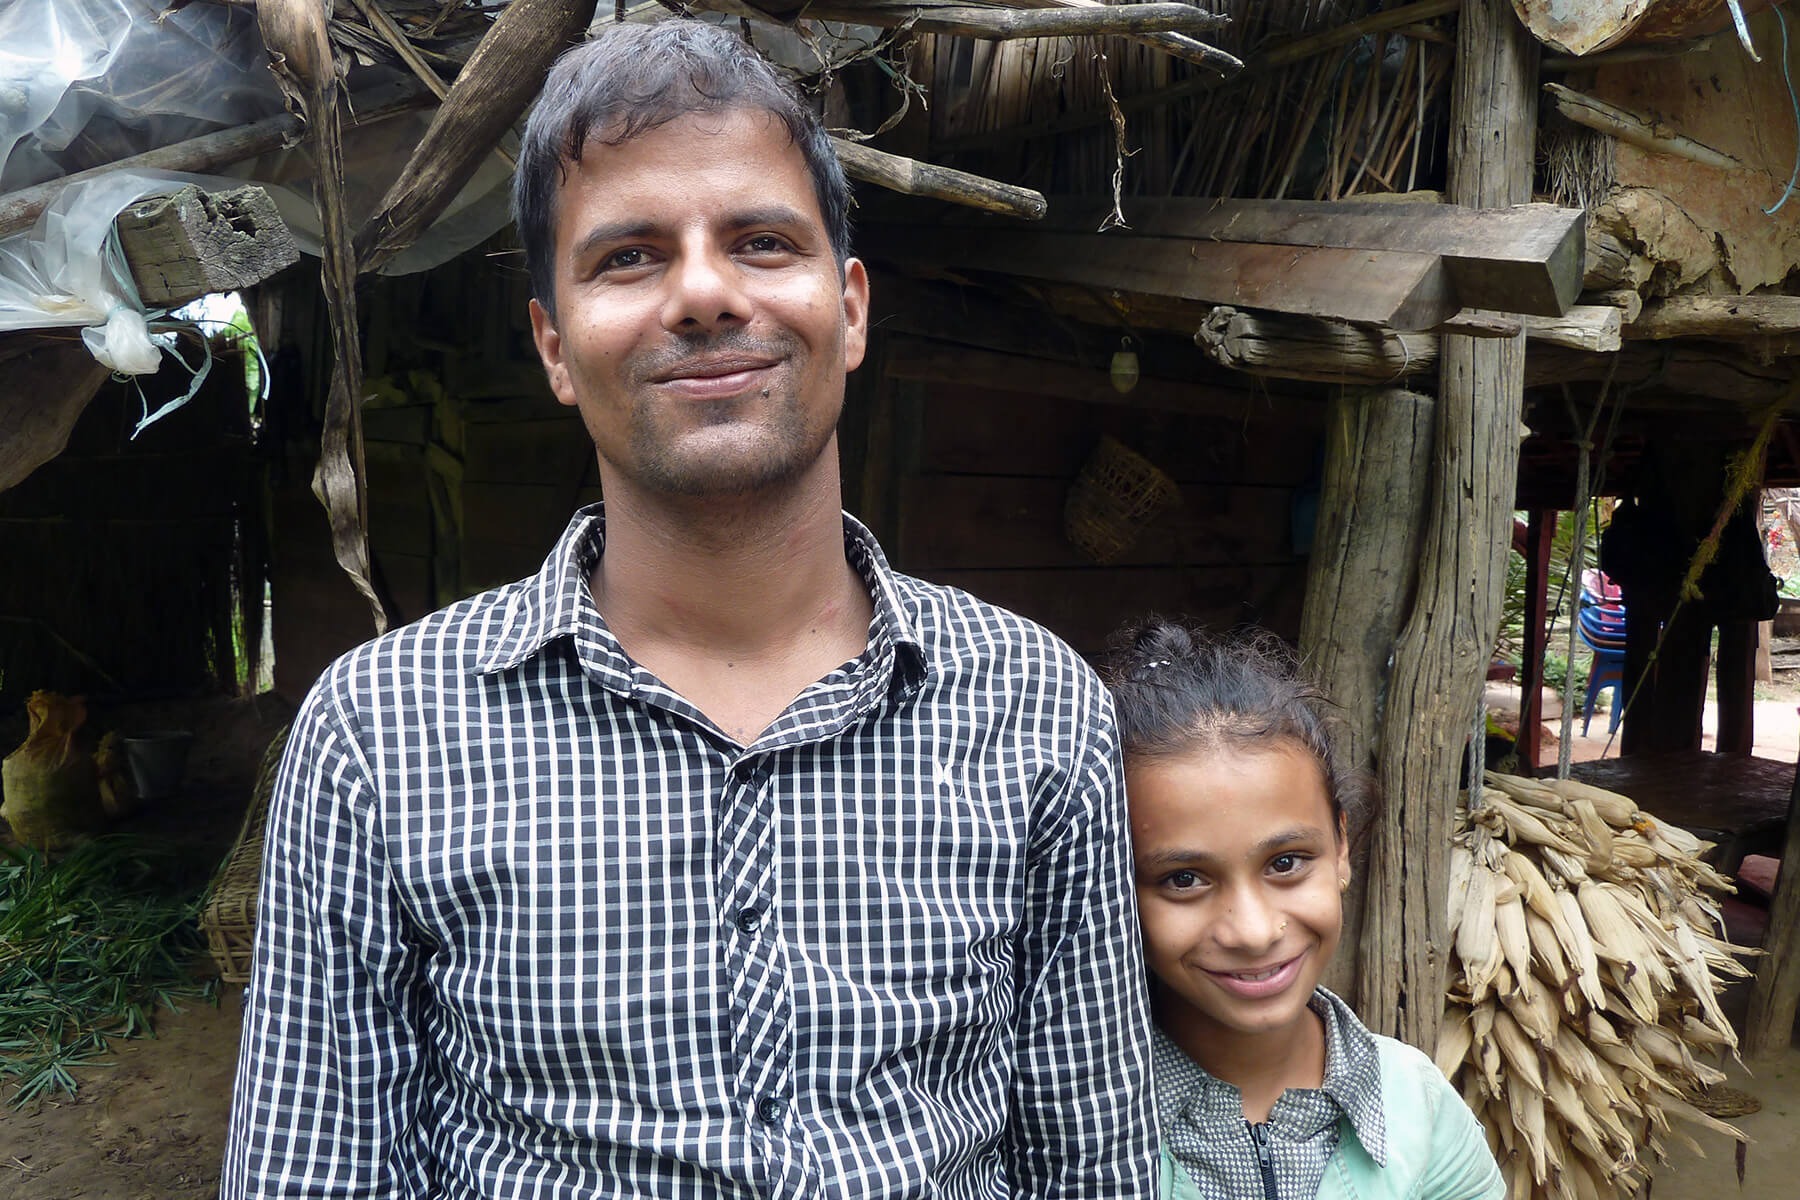 Dhruba stands with his niece Sabita out the front of their home in Chitwan